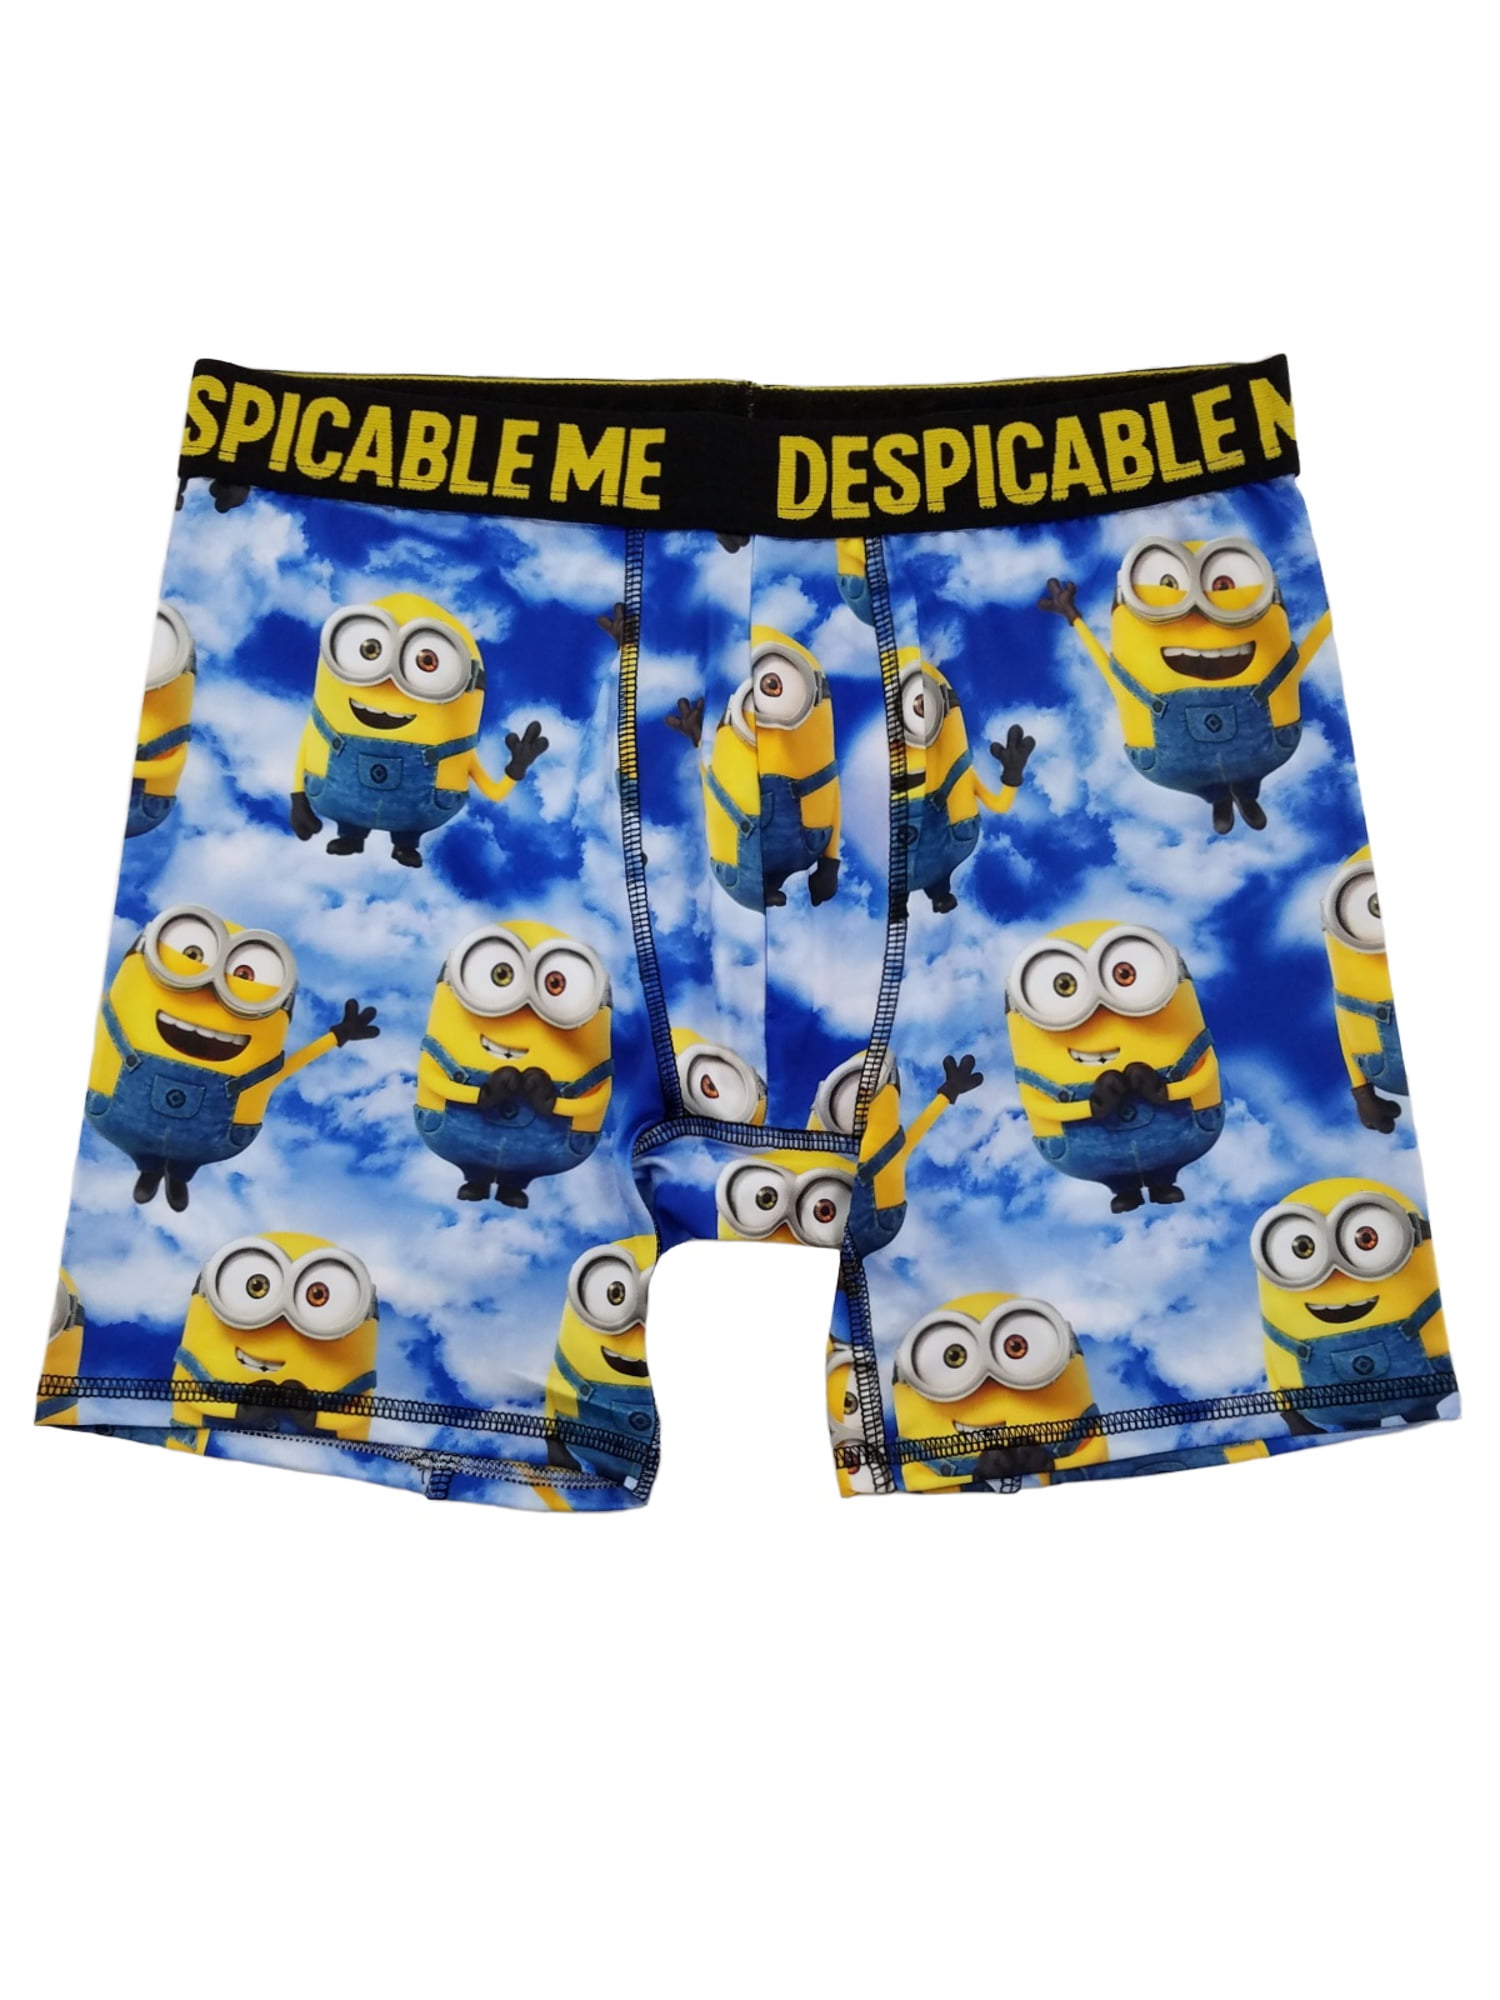 Despicable Me Minion Made Men's Boxer Sz Small 2-PACK 